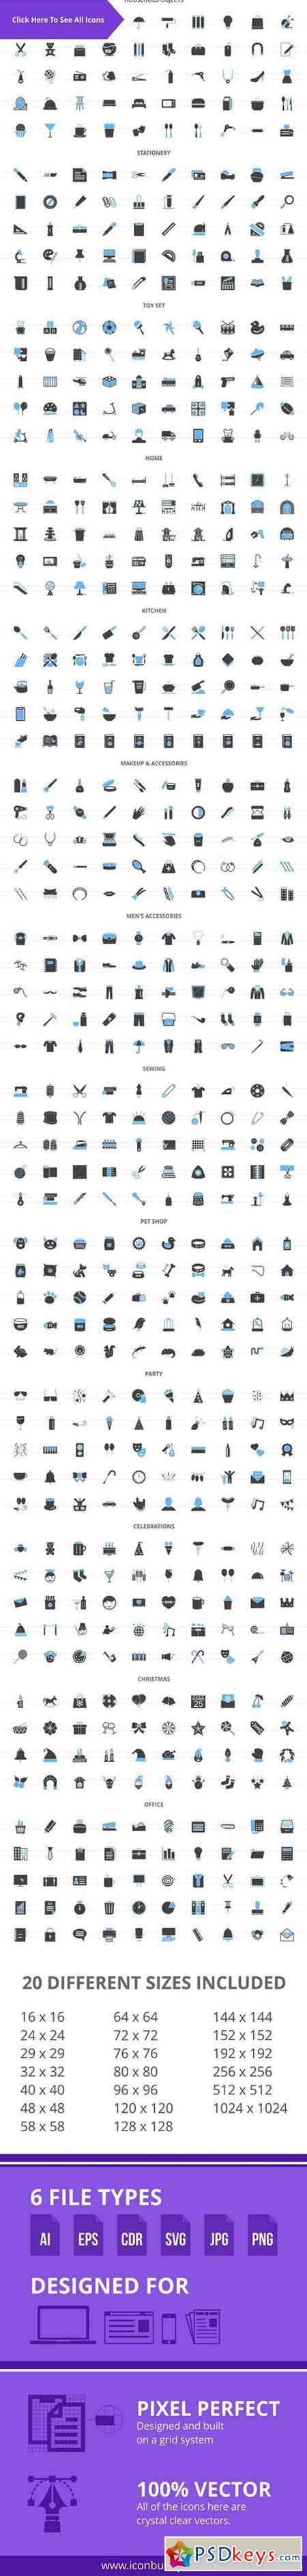 1340 Indoors Filled Icons 2402847